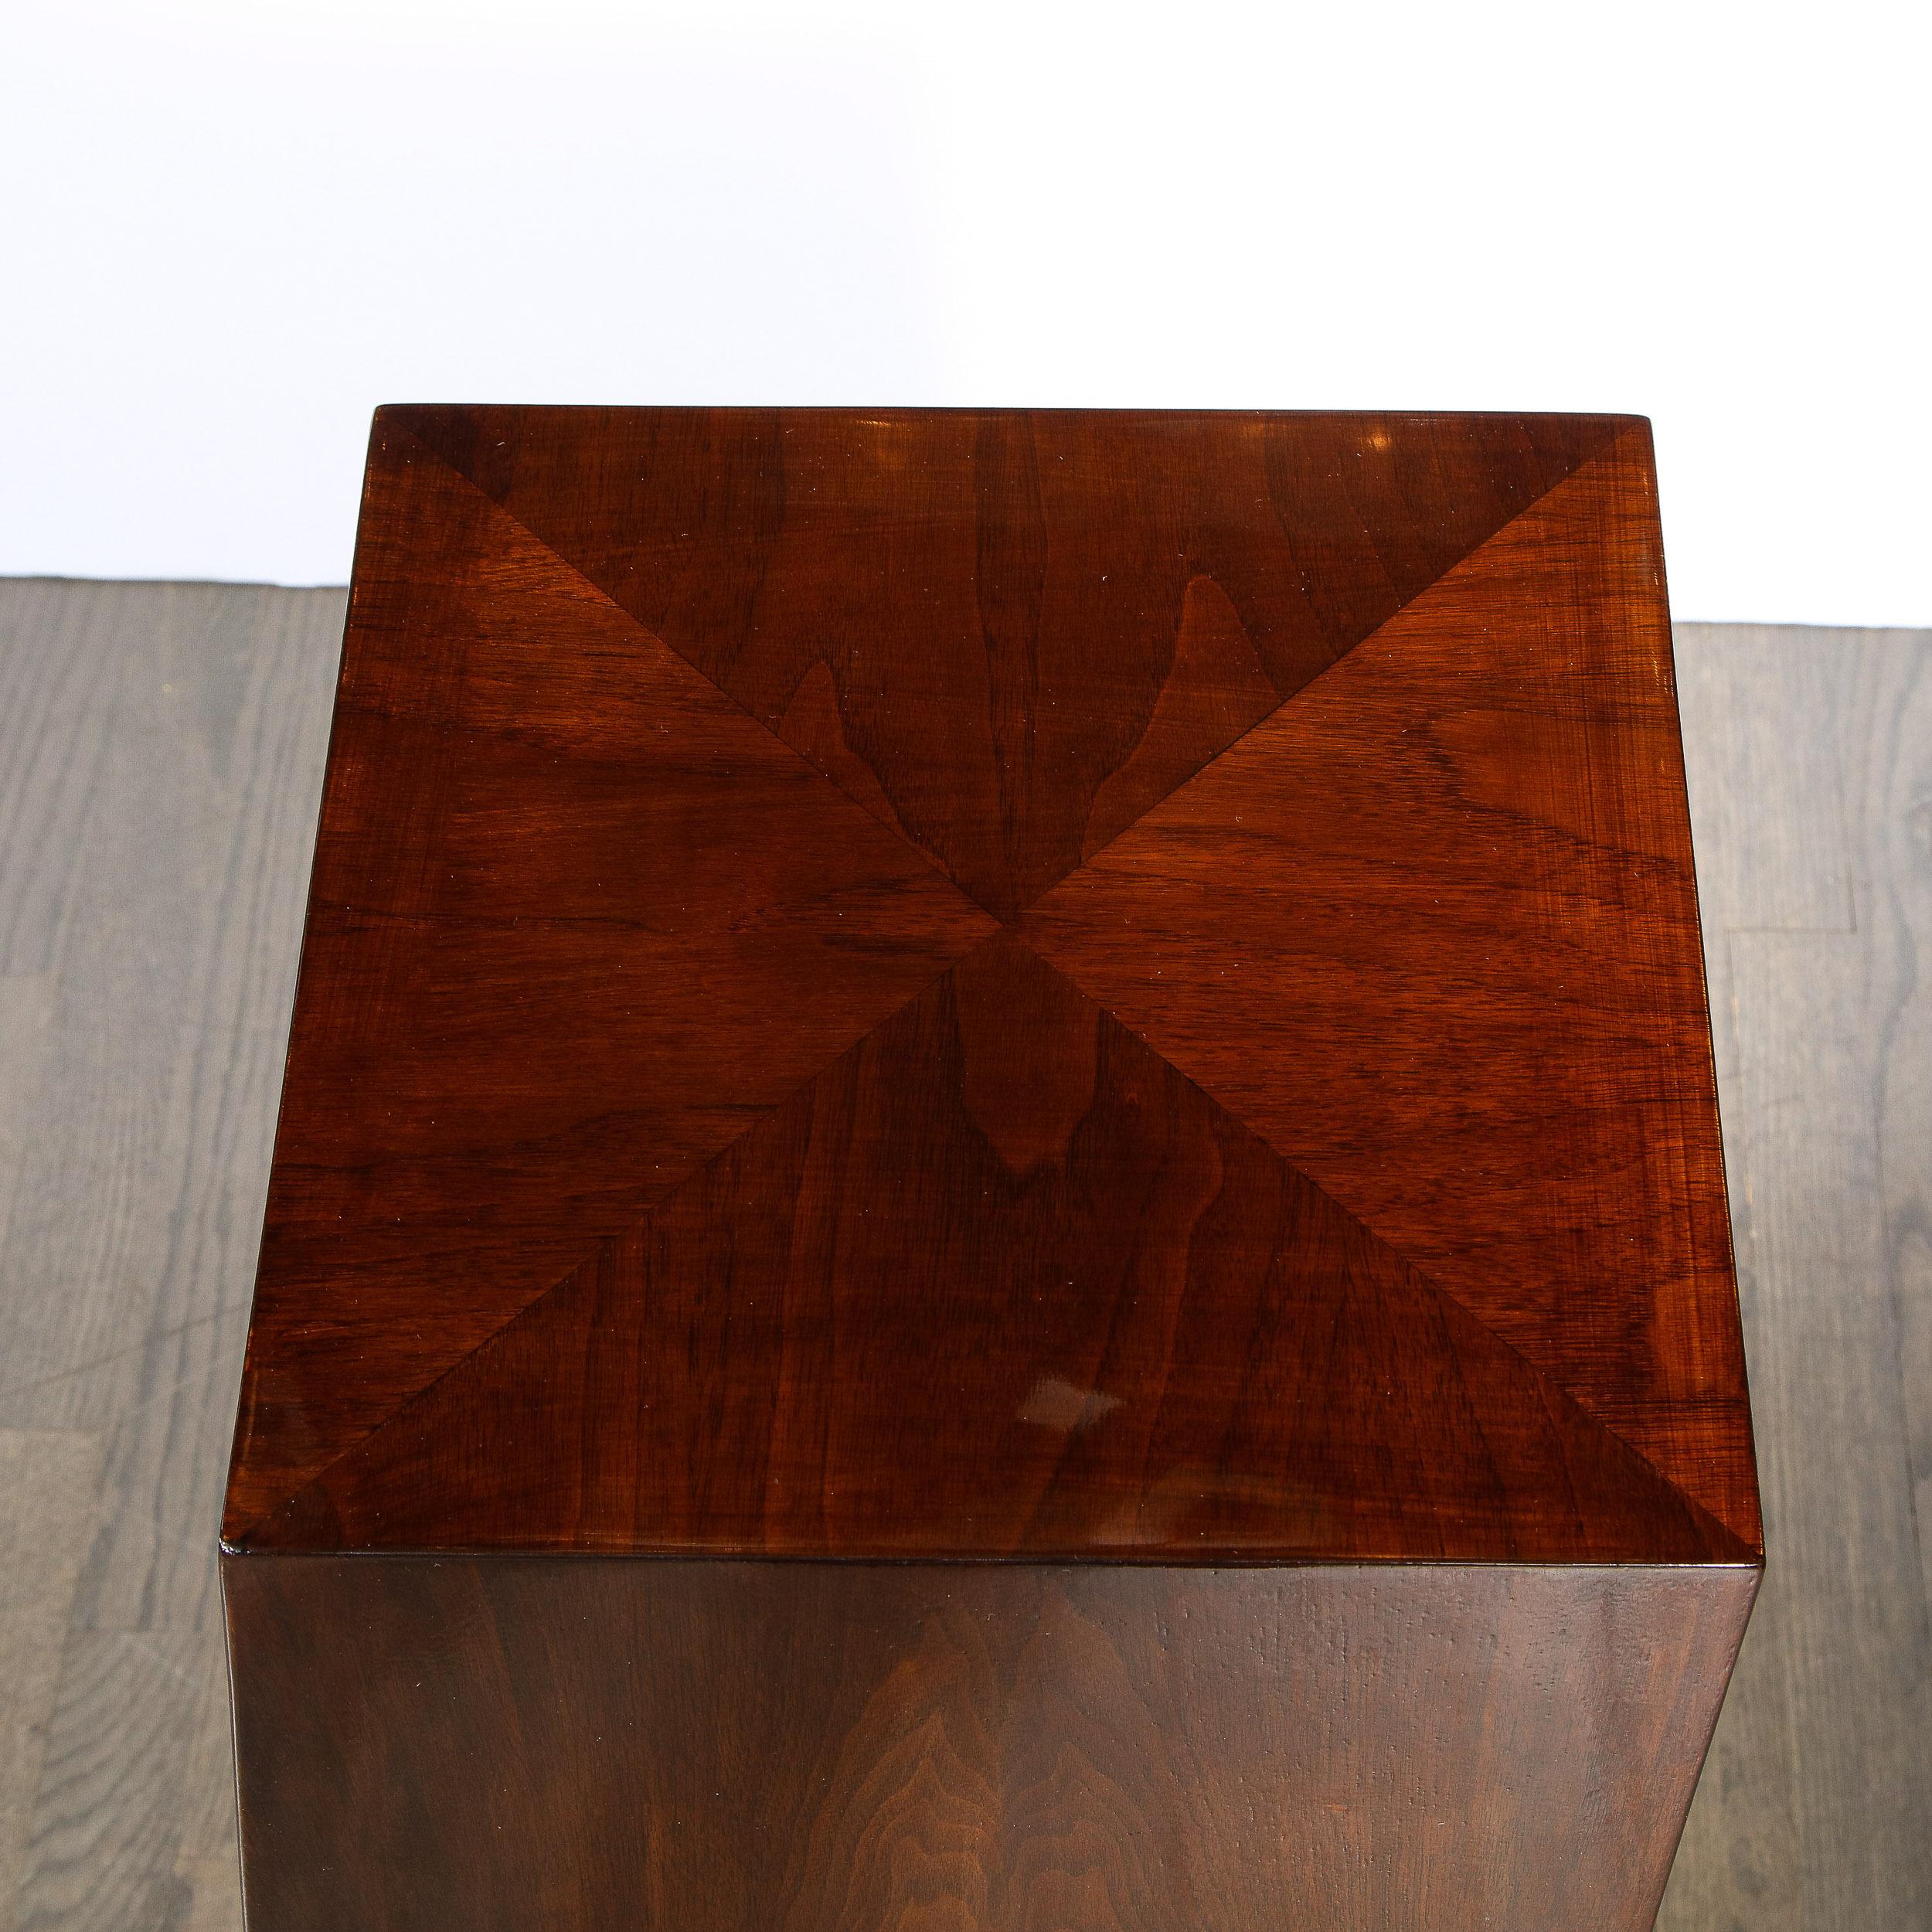 20th Century American Modernist Sculptural Bookmatched Walnut Faceted Minimalist Pedestal For Sale